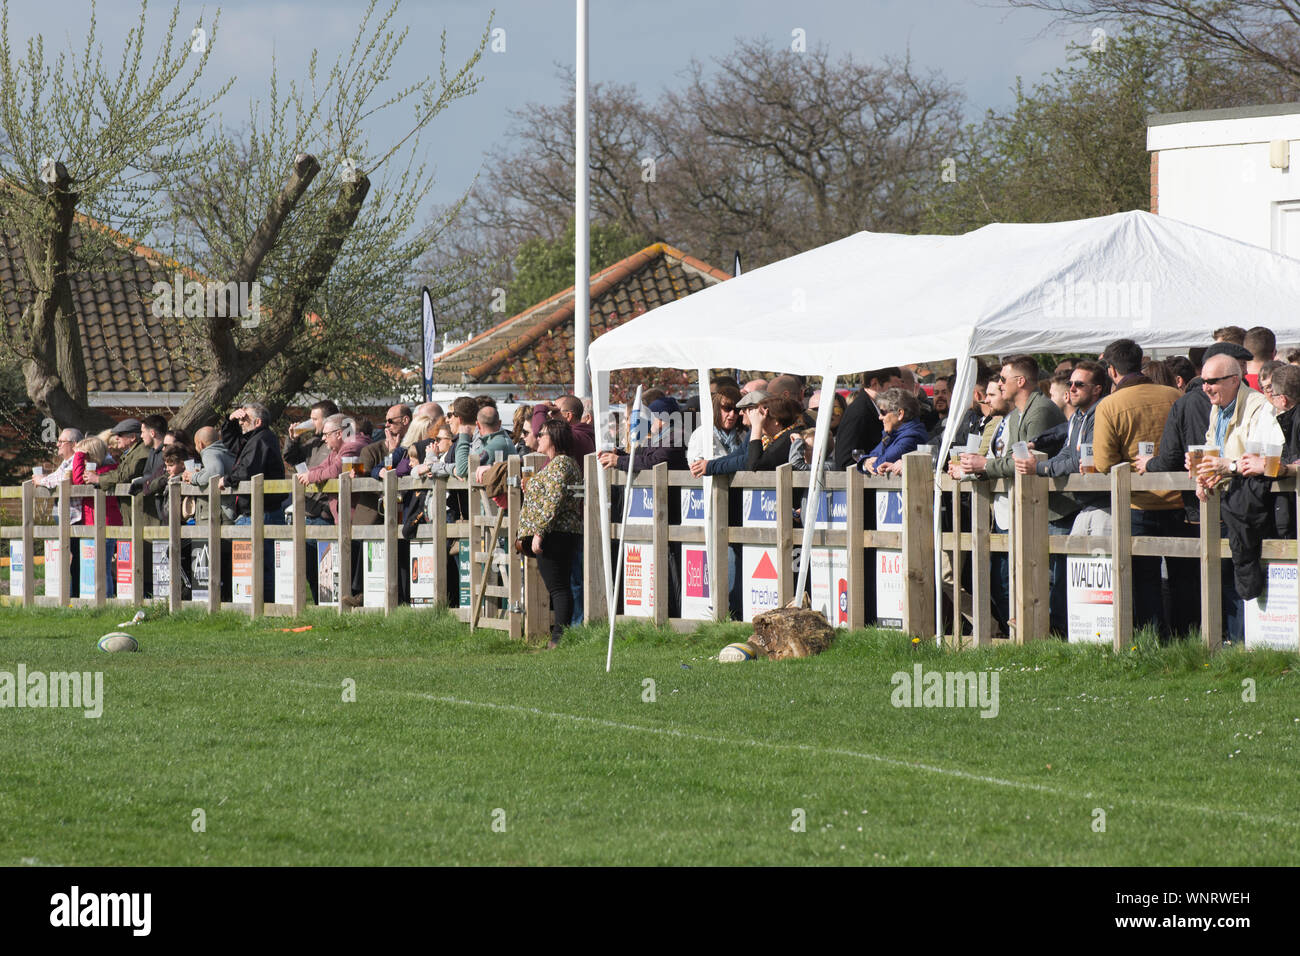 Amateur rugby club supporters pack the fence to watch local derby match Stock Photo